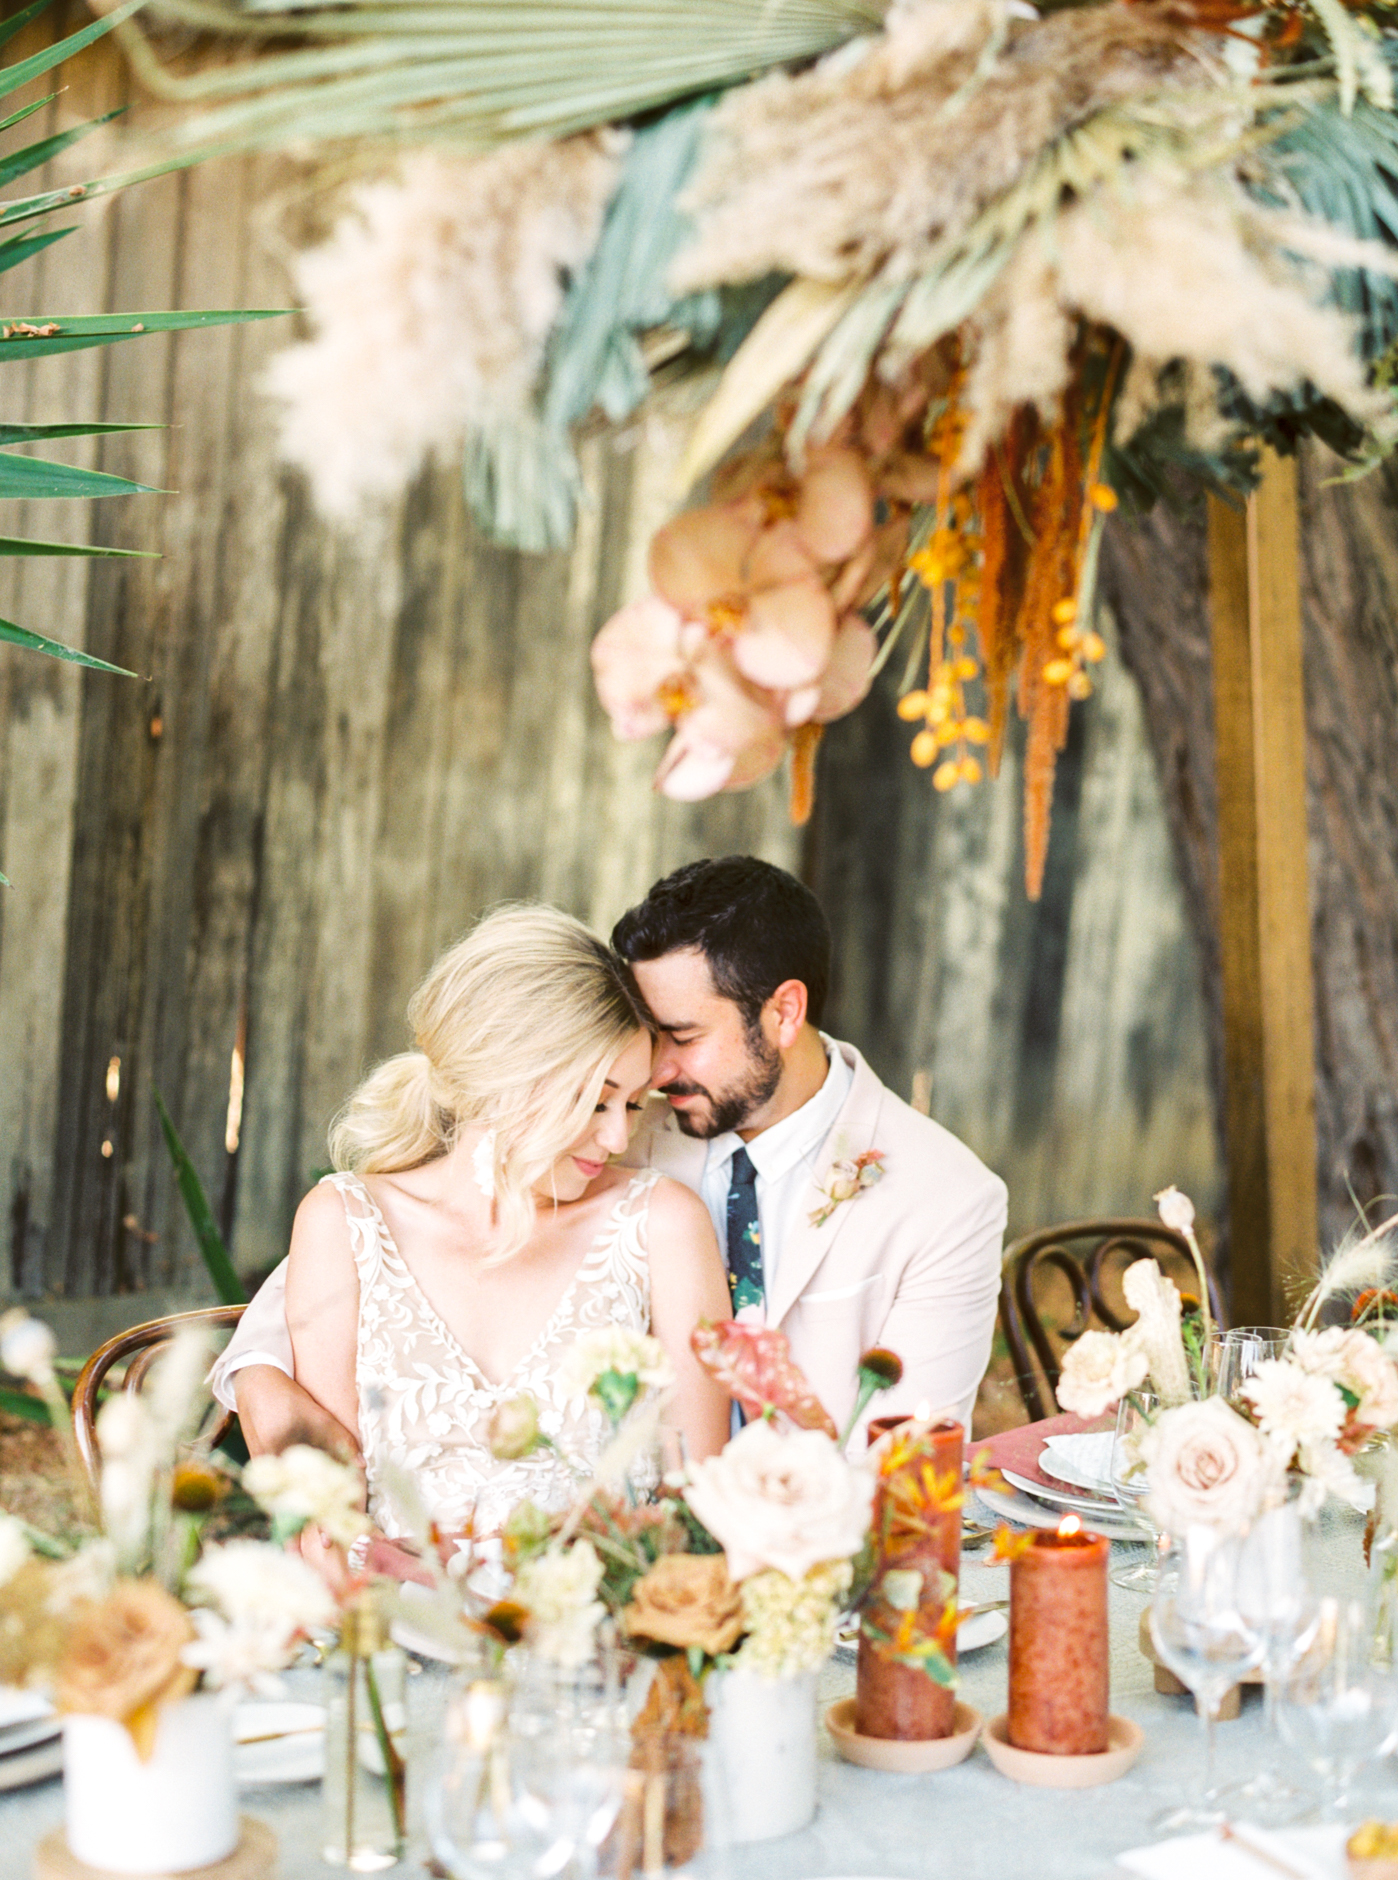 Bride and Groom cuddling at reception table under hanging floral installation at Reinstein Ranch wedding photographed by Alice Che photography